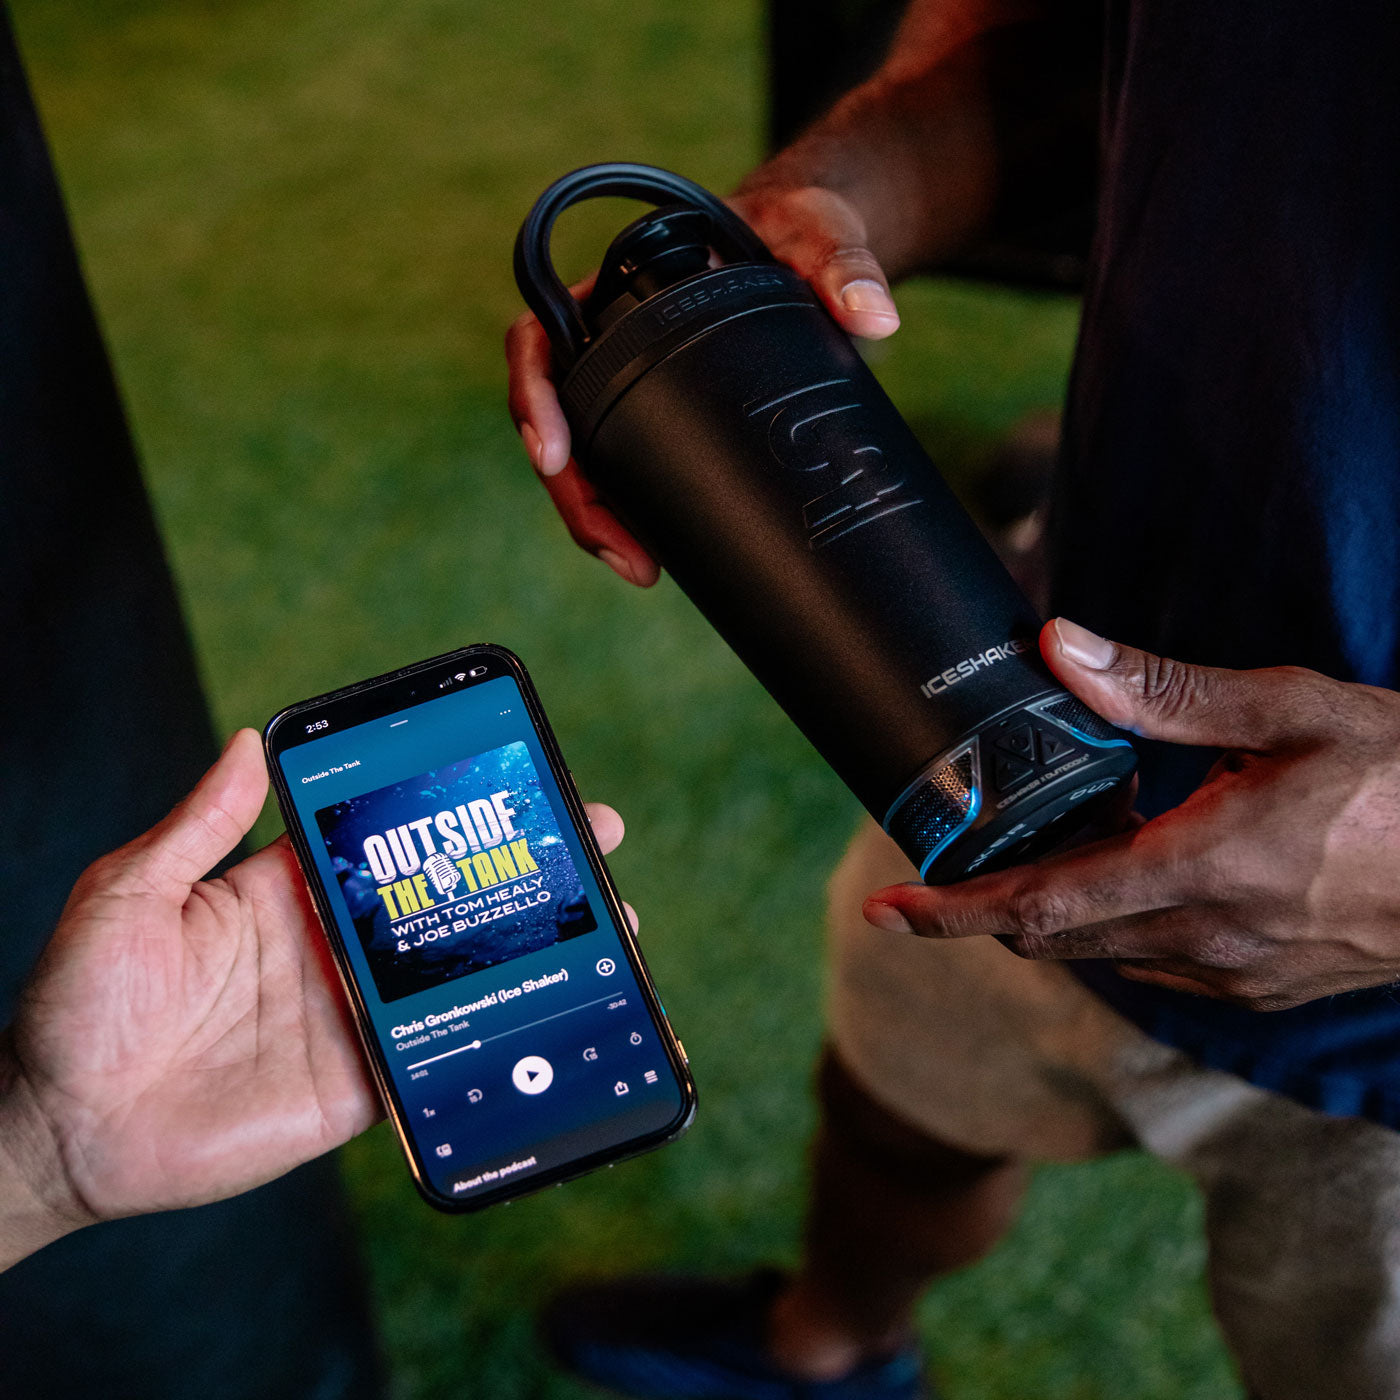 An image of the Black 20oz Speaker Bottle being paired by Bluetooth to a iPhone. On the Iphone, it is playing the Outside the Tank podcast.